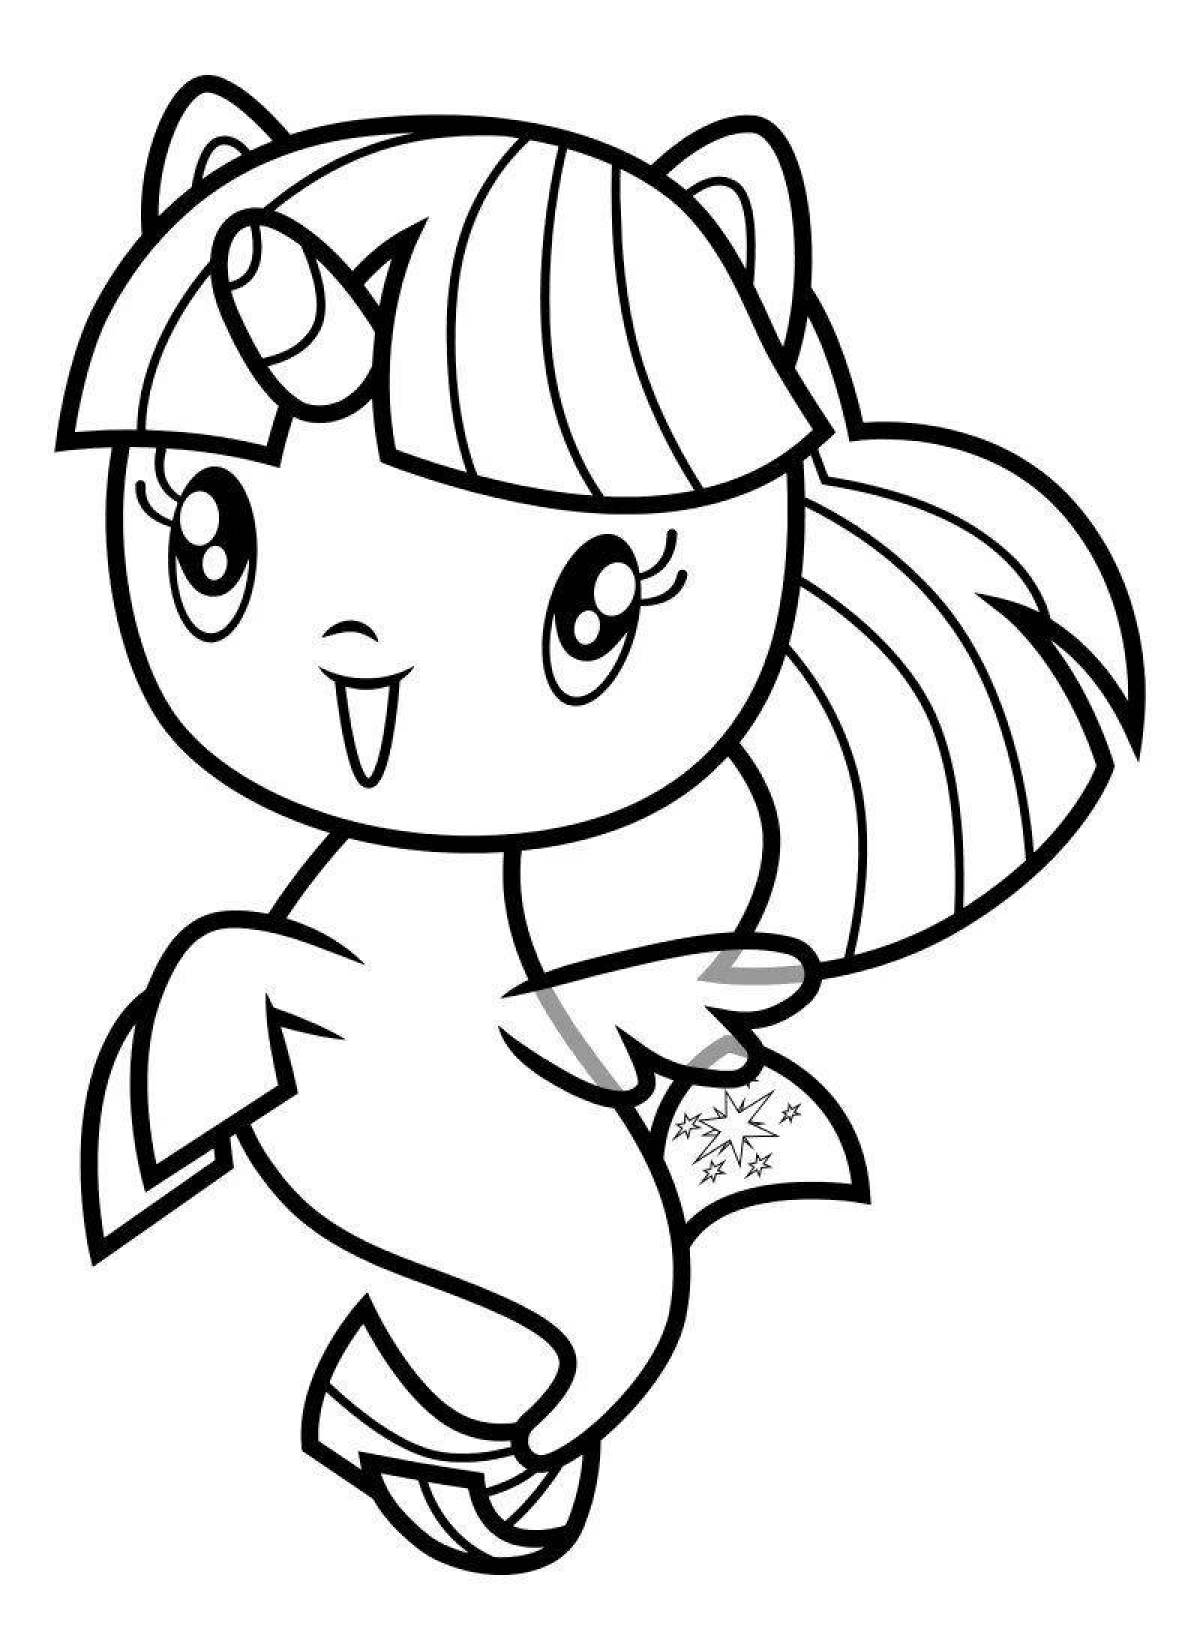 Coloring page blissful pony cuties